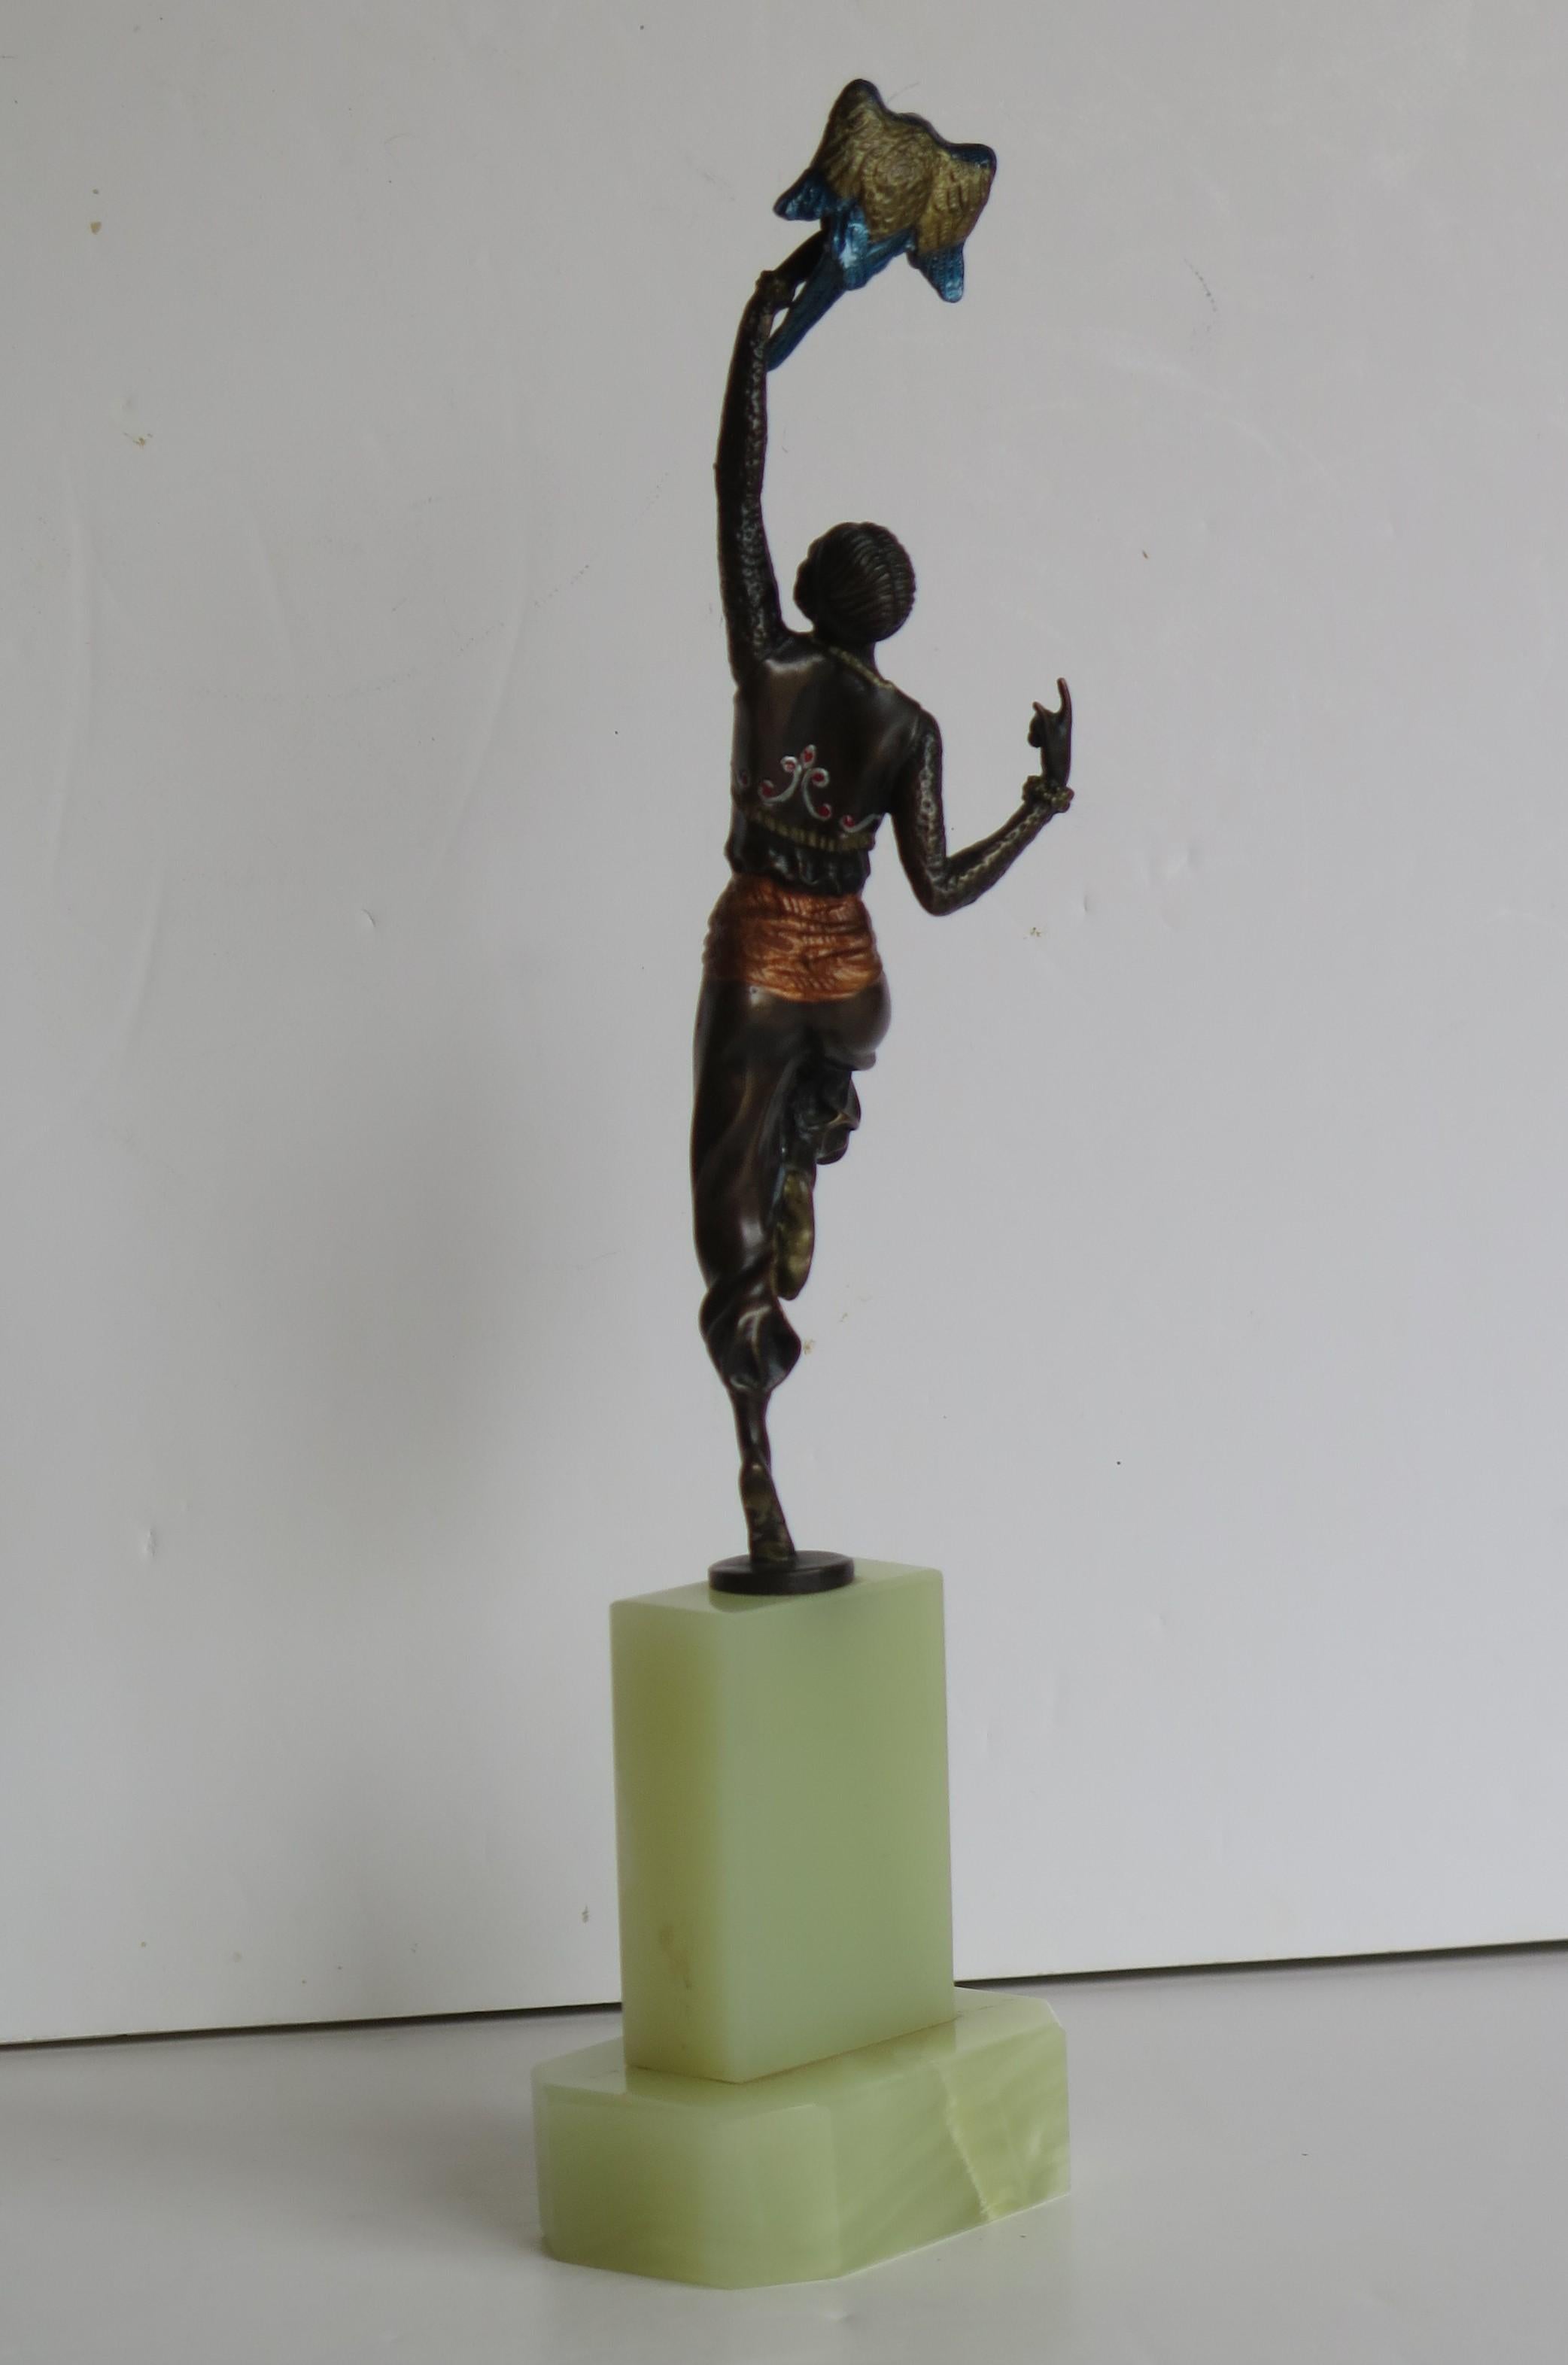 Hand-Crafted Bronze Figurine Sculpture by or after Paul Philippe La Danseur Perroquet, Ca1920 For Sale